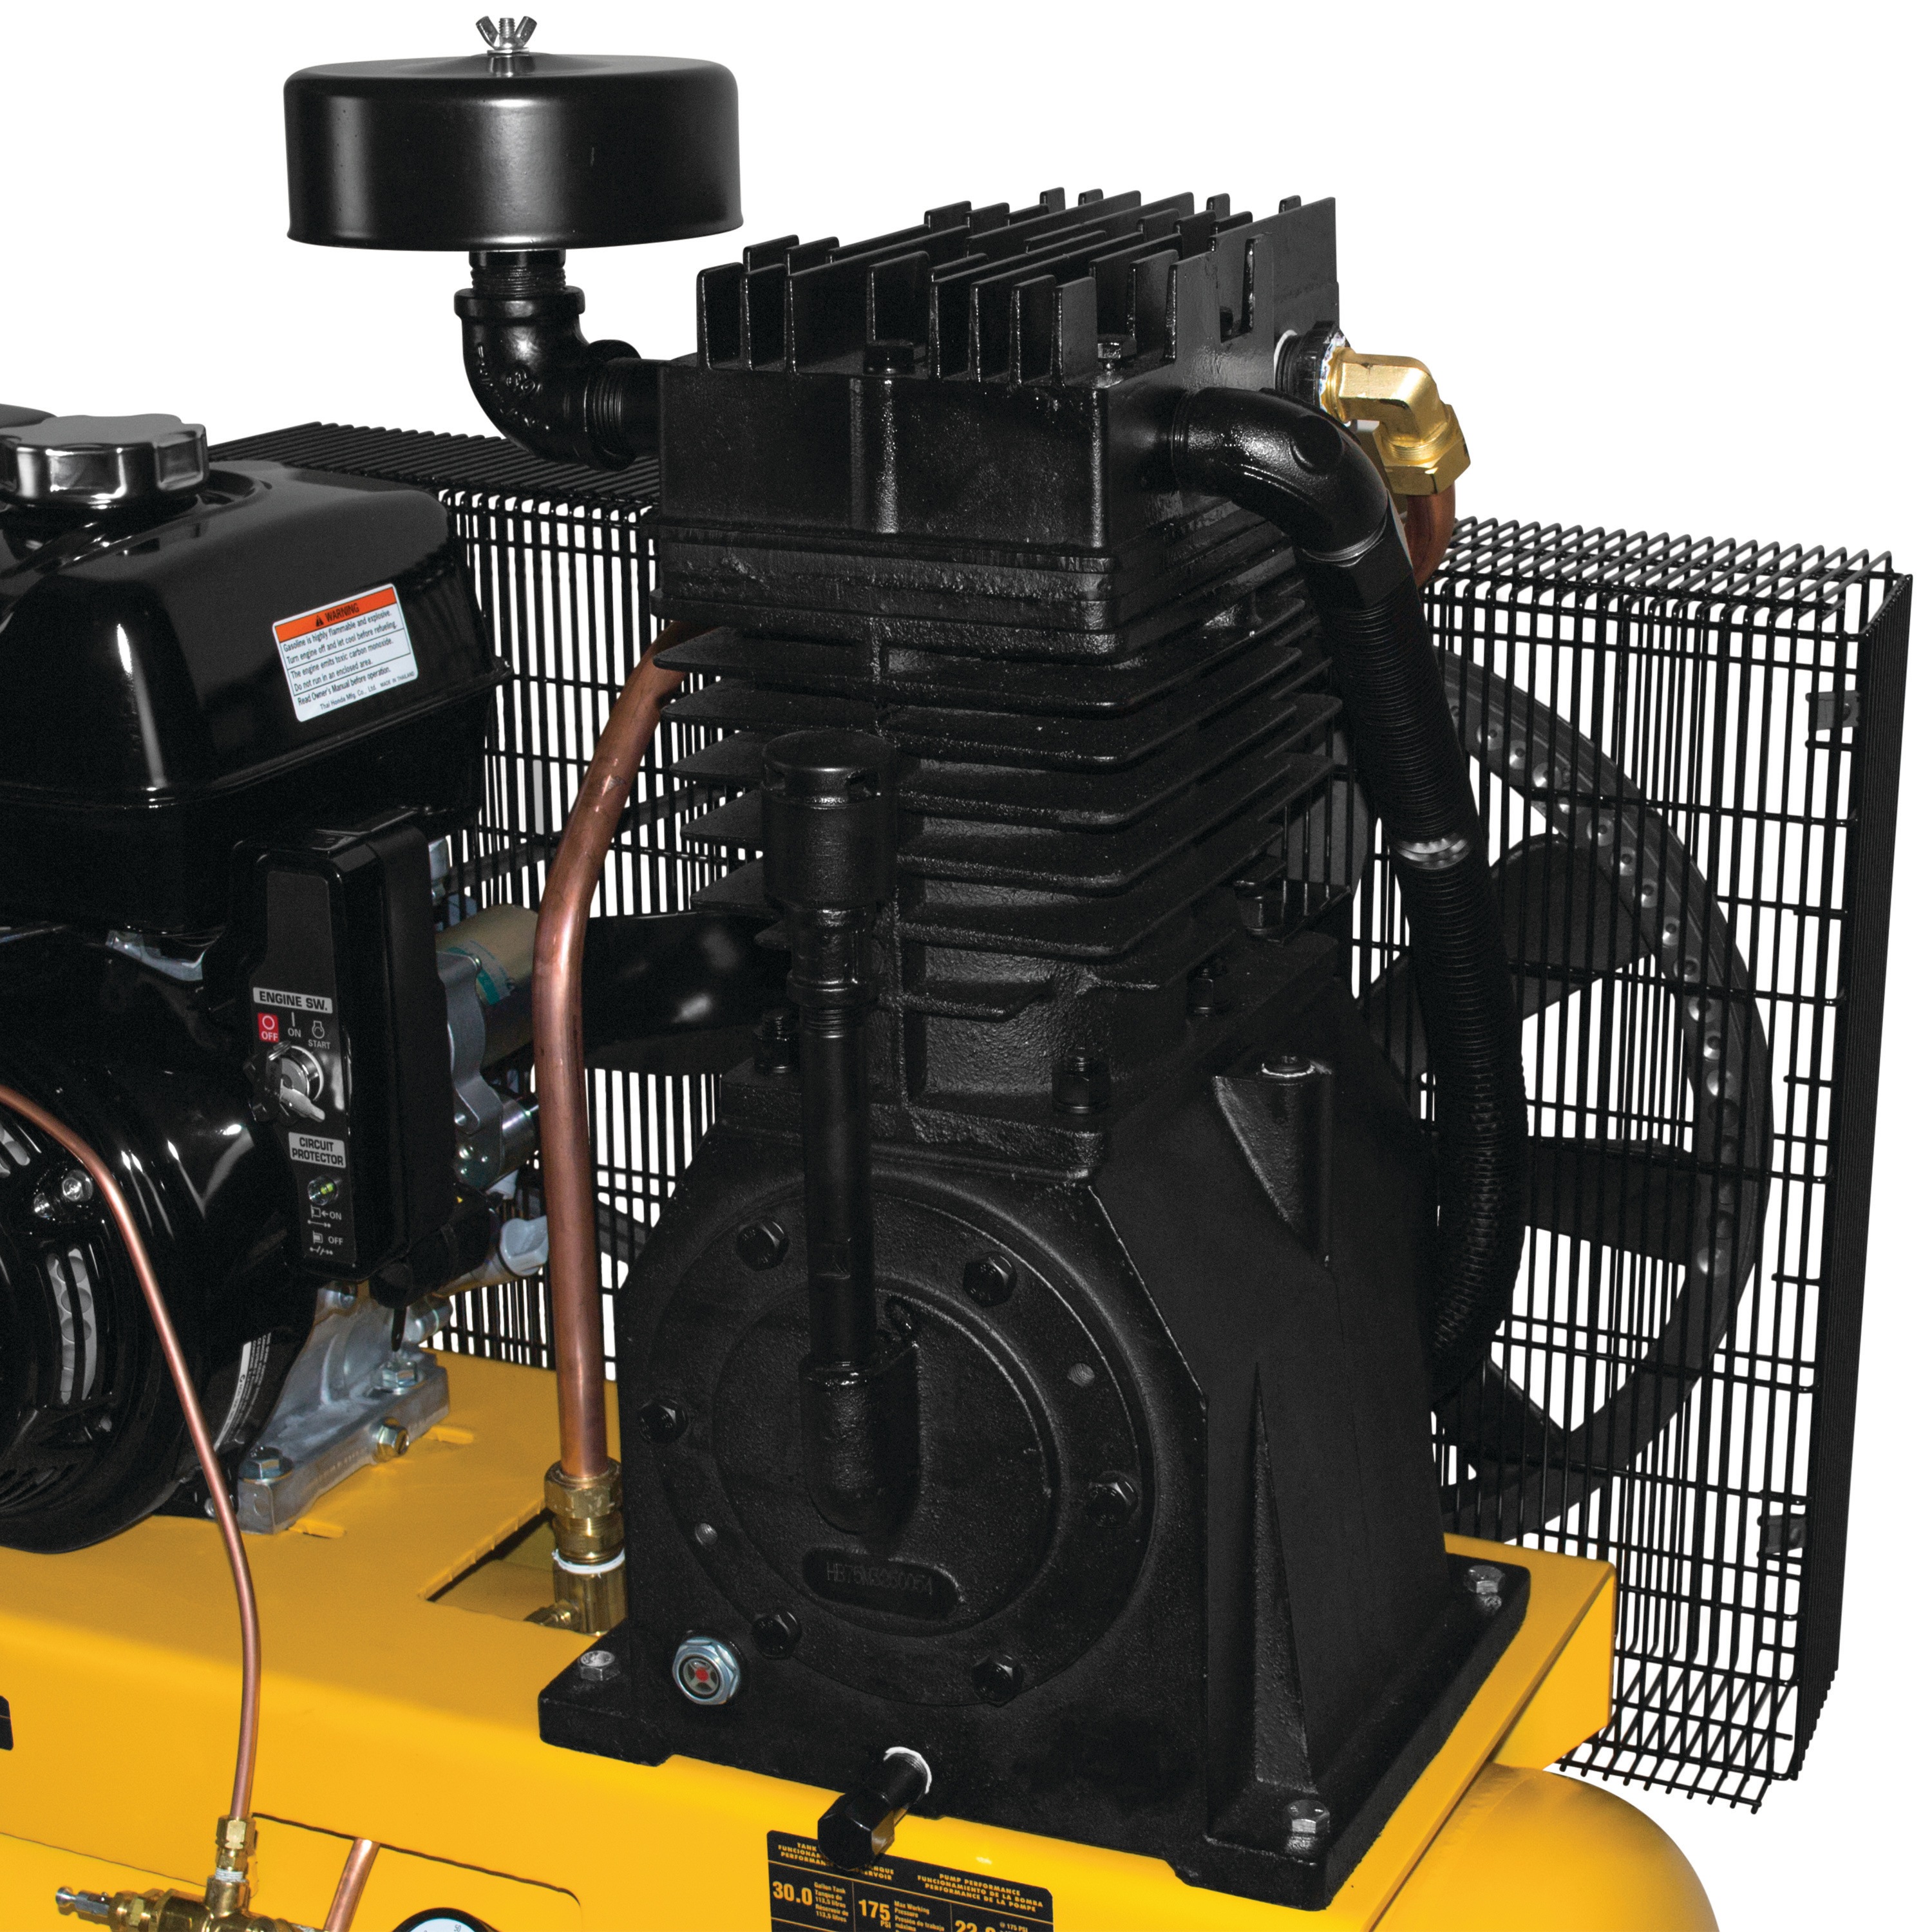 Diesel engine feature of 30 Gallon 2 stage portable gas powered truck mount air compressor.
